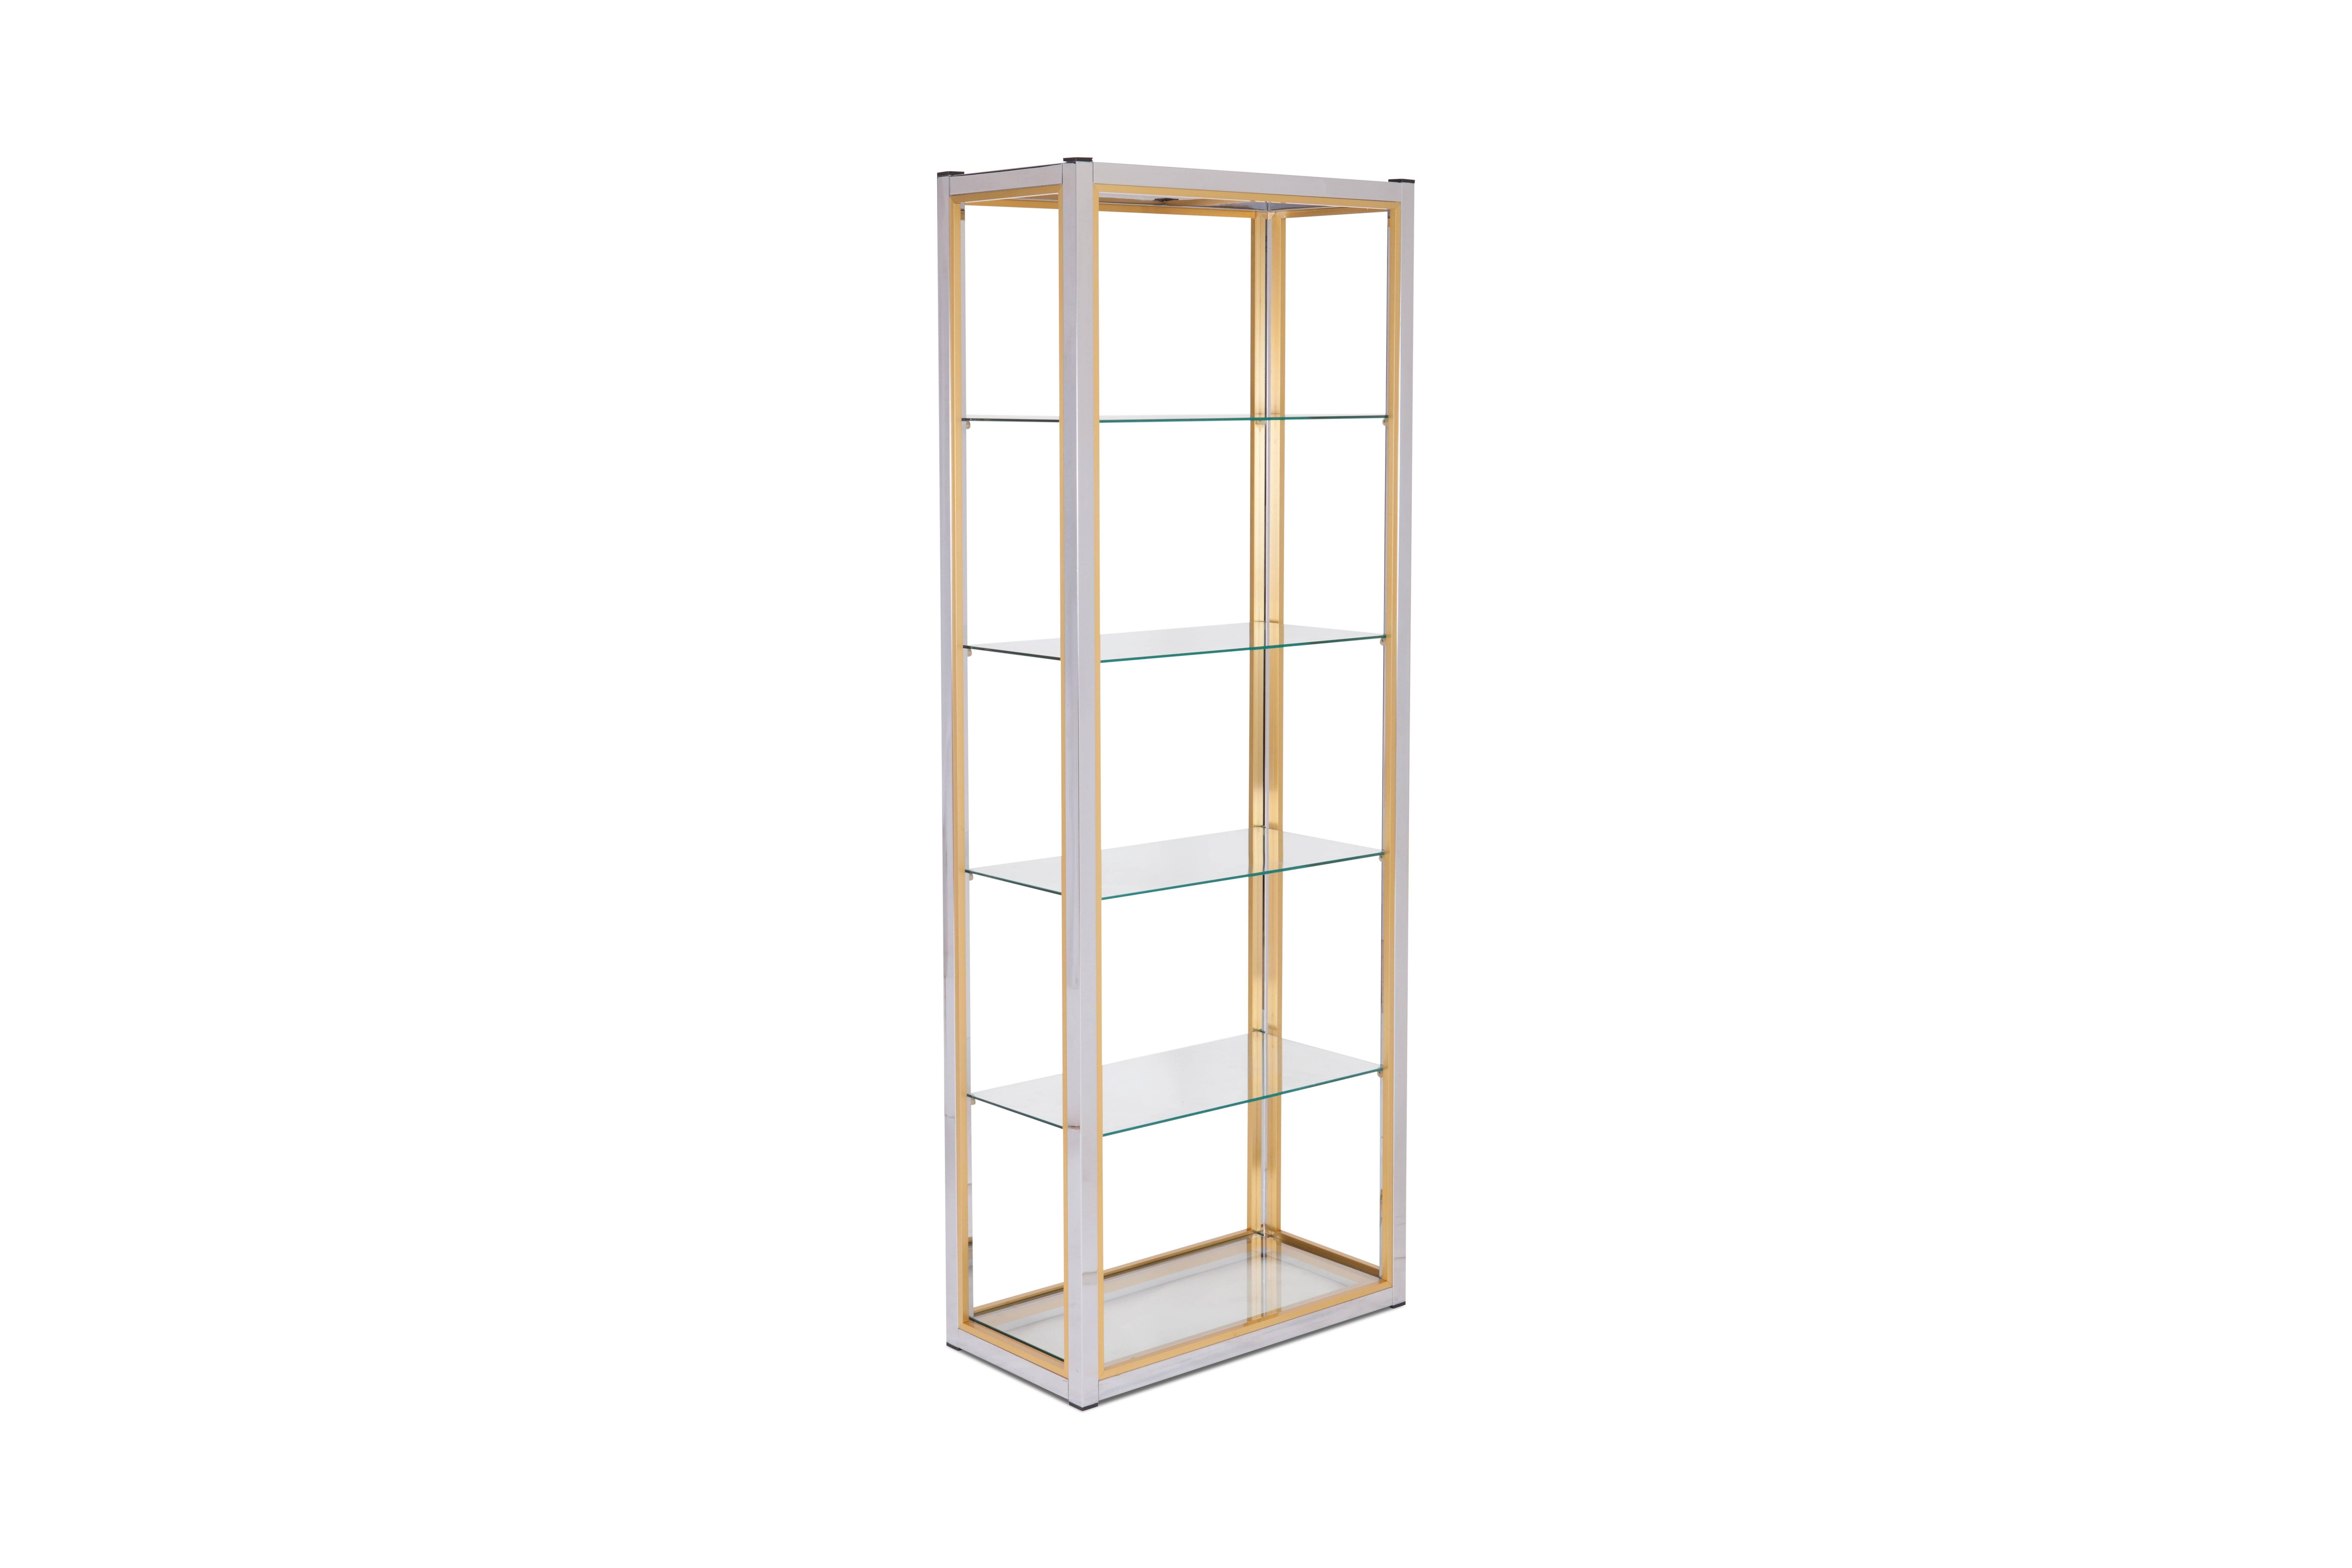 Renato Zevi, étagère, display piece, Italy 1970s

Chrome frame with brass details. The cabinet is provided with five glass shelves.
Would fit well in an eclectic decor inspired by Hollywood Regency.

Measures: H 201, (between shelves 39.5) D